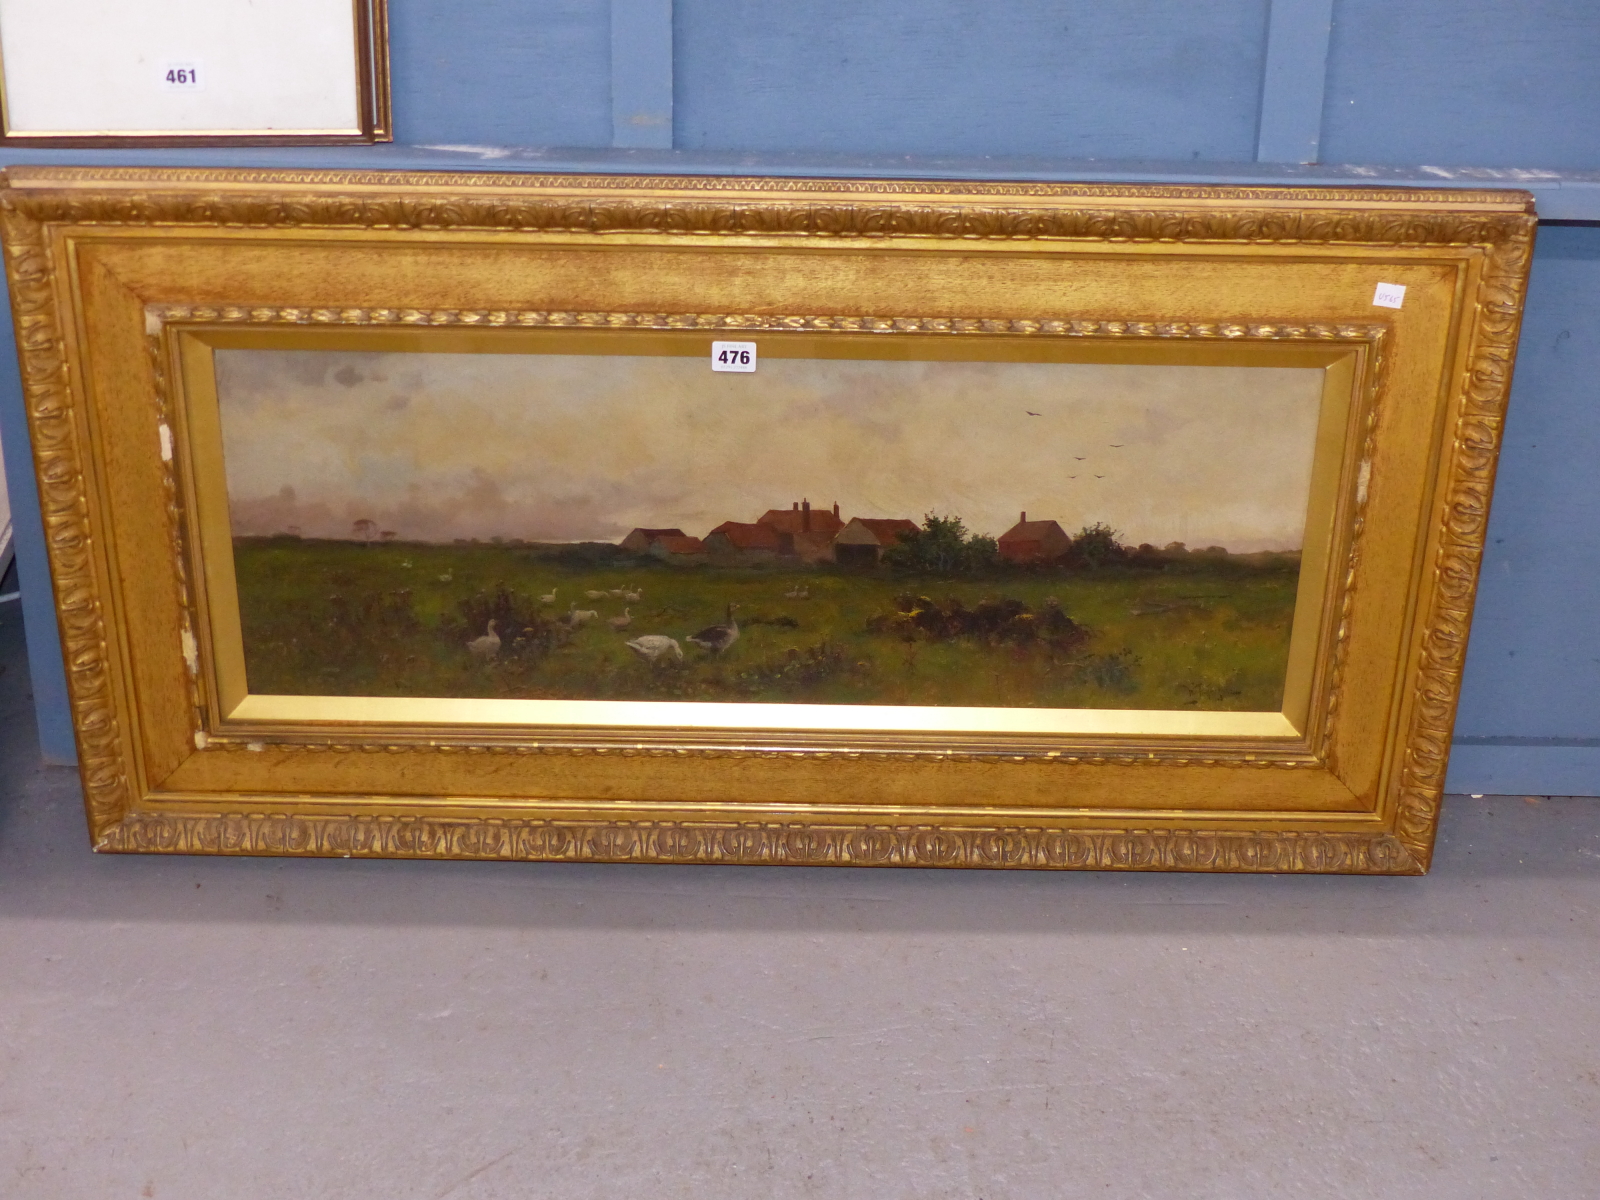 WILL ANDERSON (19TH/20TH CENTURY), GEESE BY A FARM IN AN EXTENSIVE LANDSCAPE, SIGNED LOWER RIGHT, - Image 2 of 8